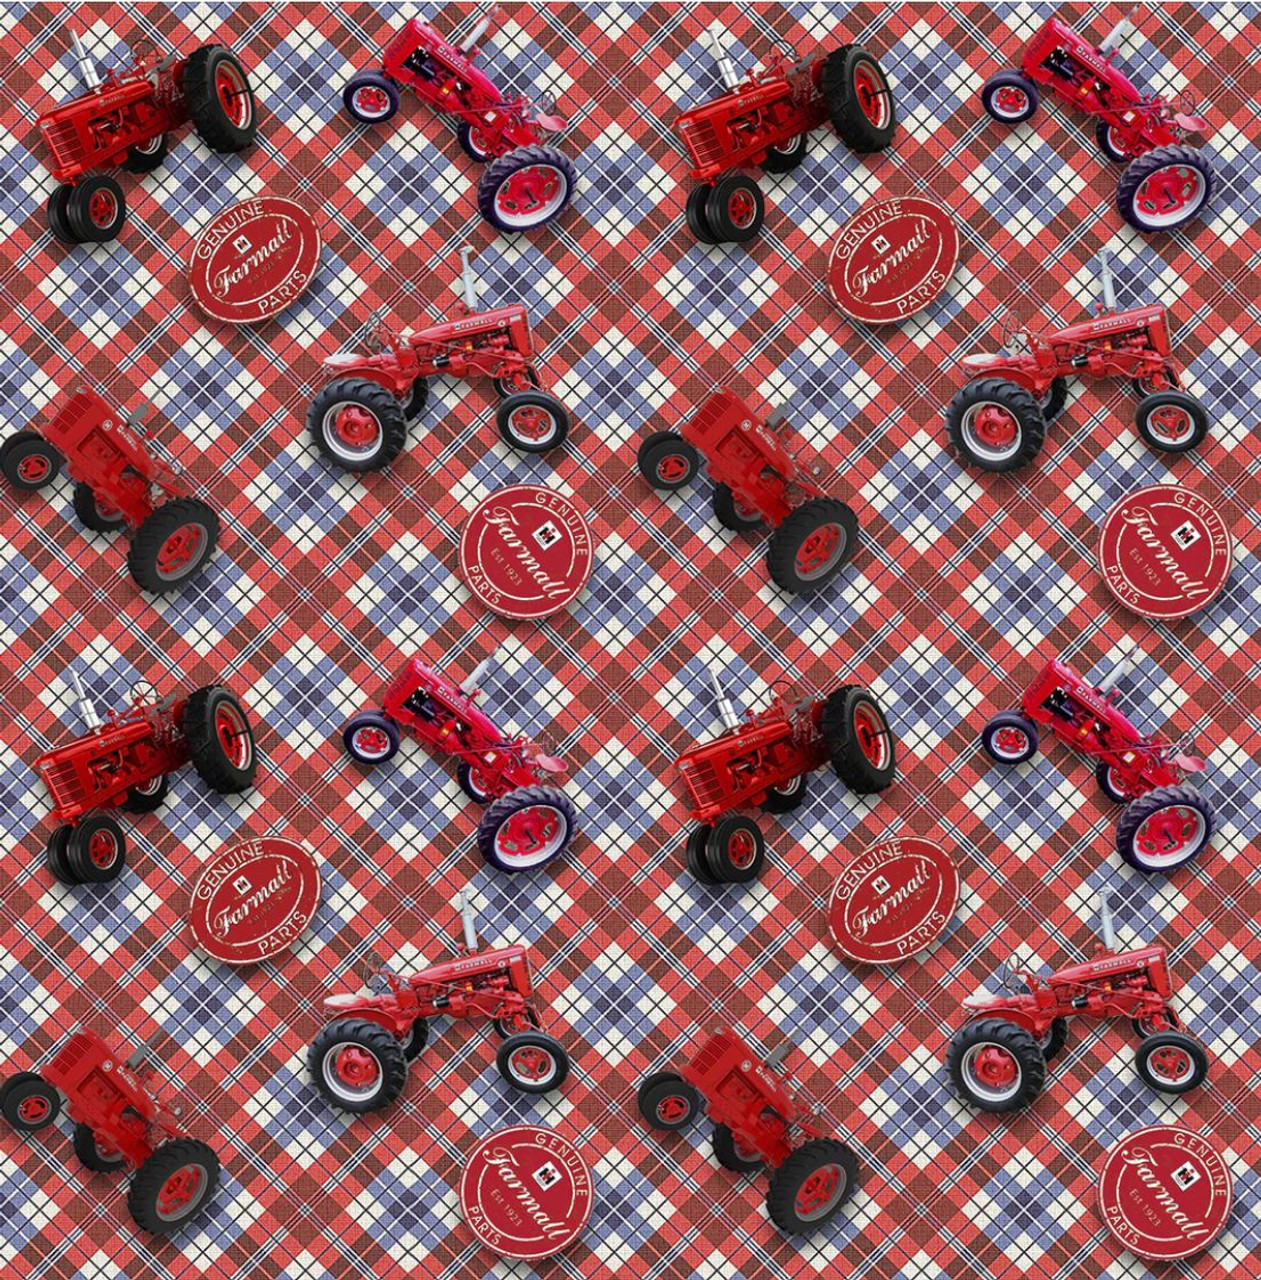 Farmall Agriculture Cotton Fabric Collection by Sykel-Tractors Tossed on Plaid